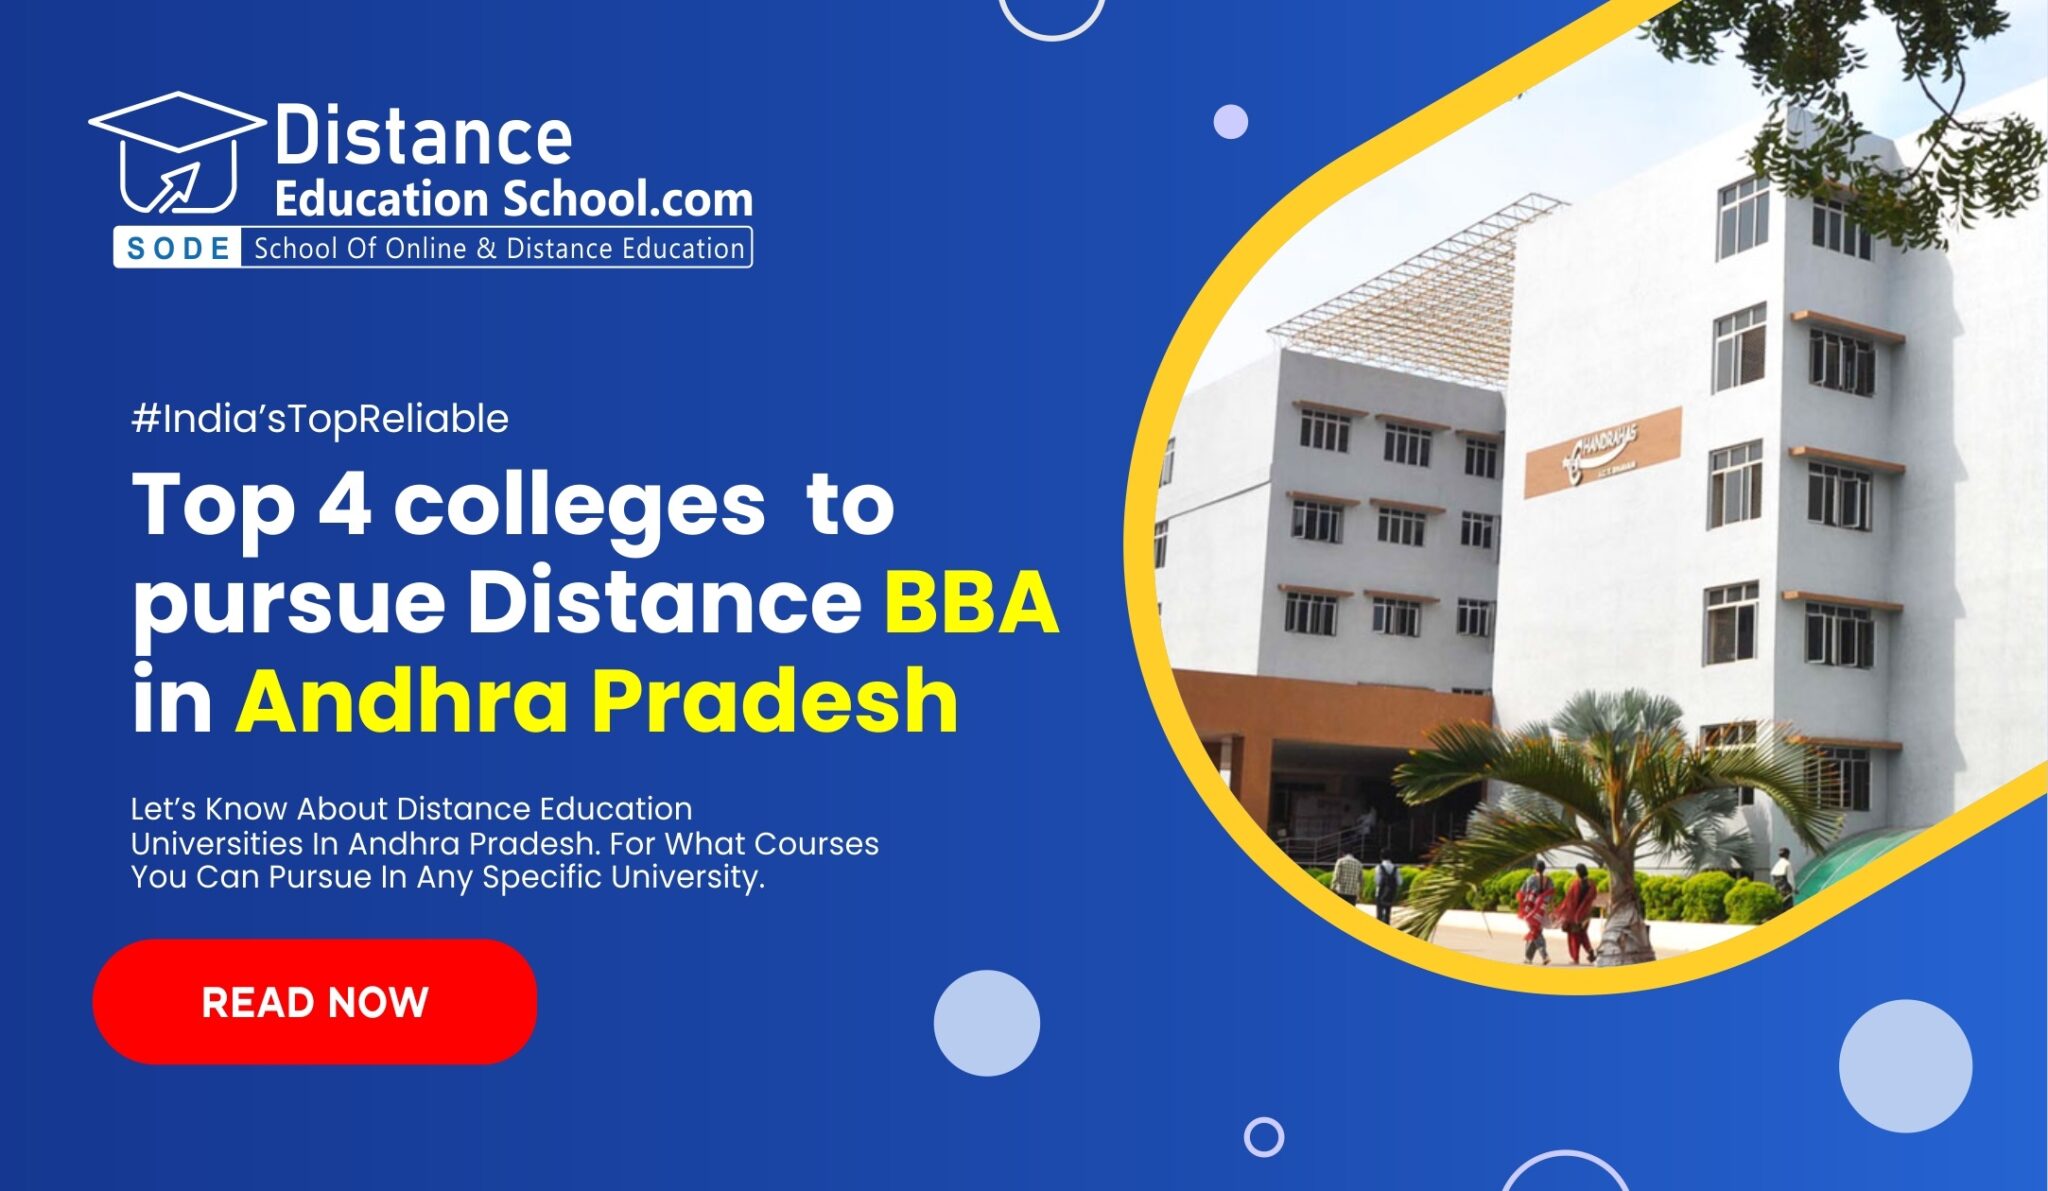 Top 4 colleges to pursue Distance BBA in Andhra Pradesh